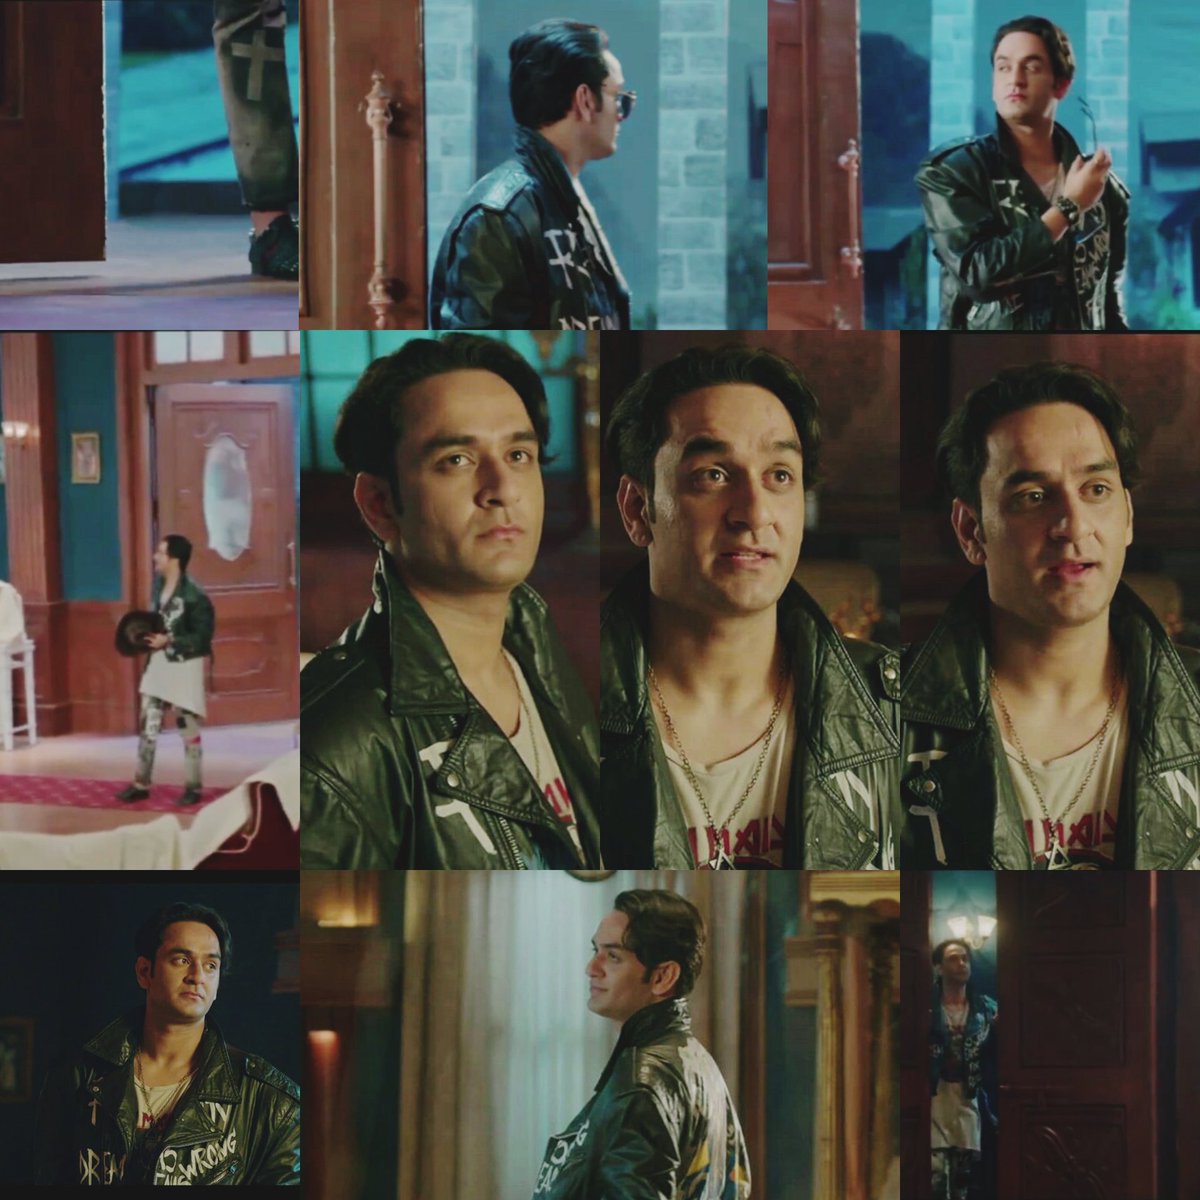 @lostboy54 More from #raginimms2  of @lostboy54 😍😍❤❤🙌👌😘 

He is ruling on screen by his appearance n by his voice😍😍❤❤
 Slayer 😎
VG u need to do this moreeee👌

#VikasGupta 
#Lostboyjourney 
#LostSouls 
#raginimms2 
#AltBalaji